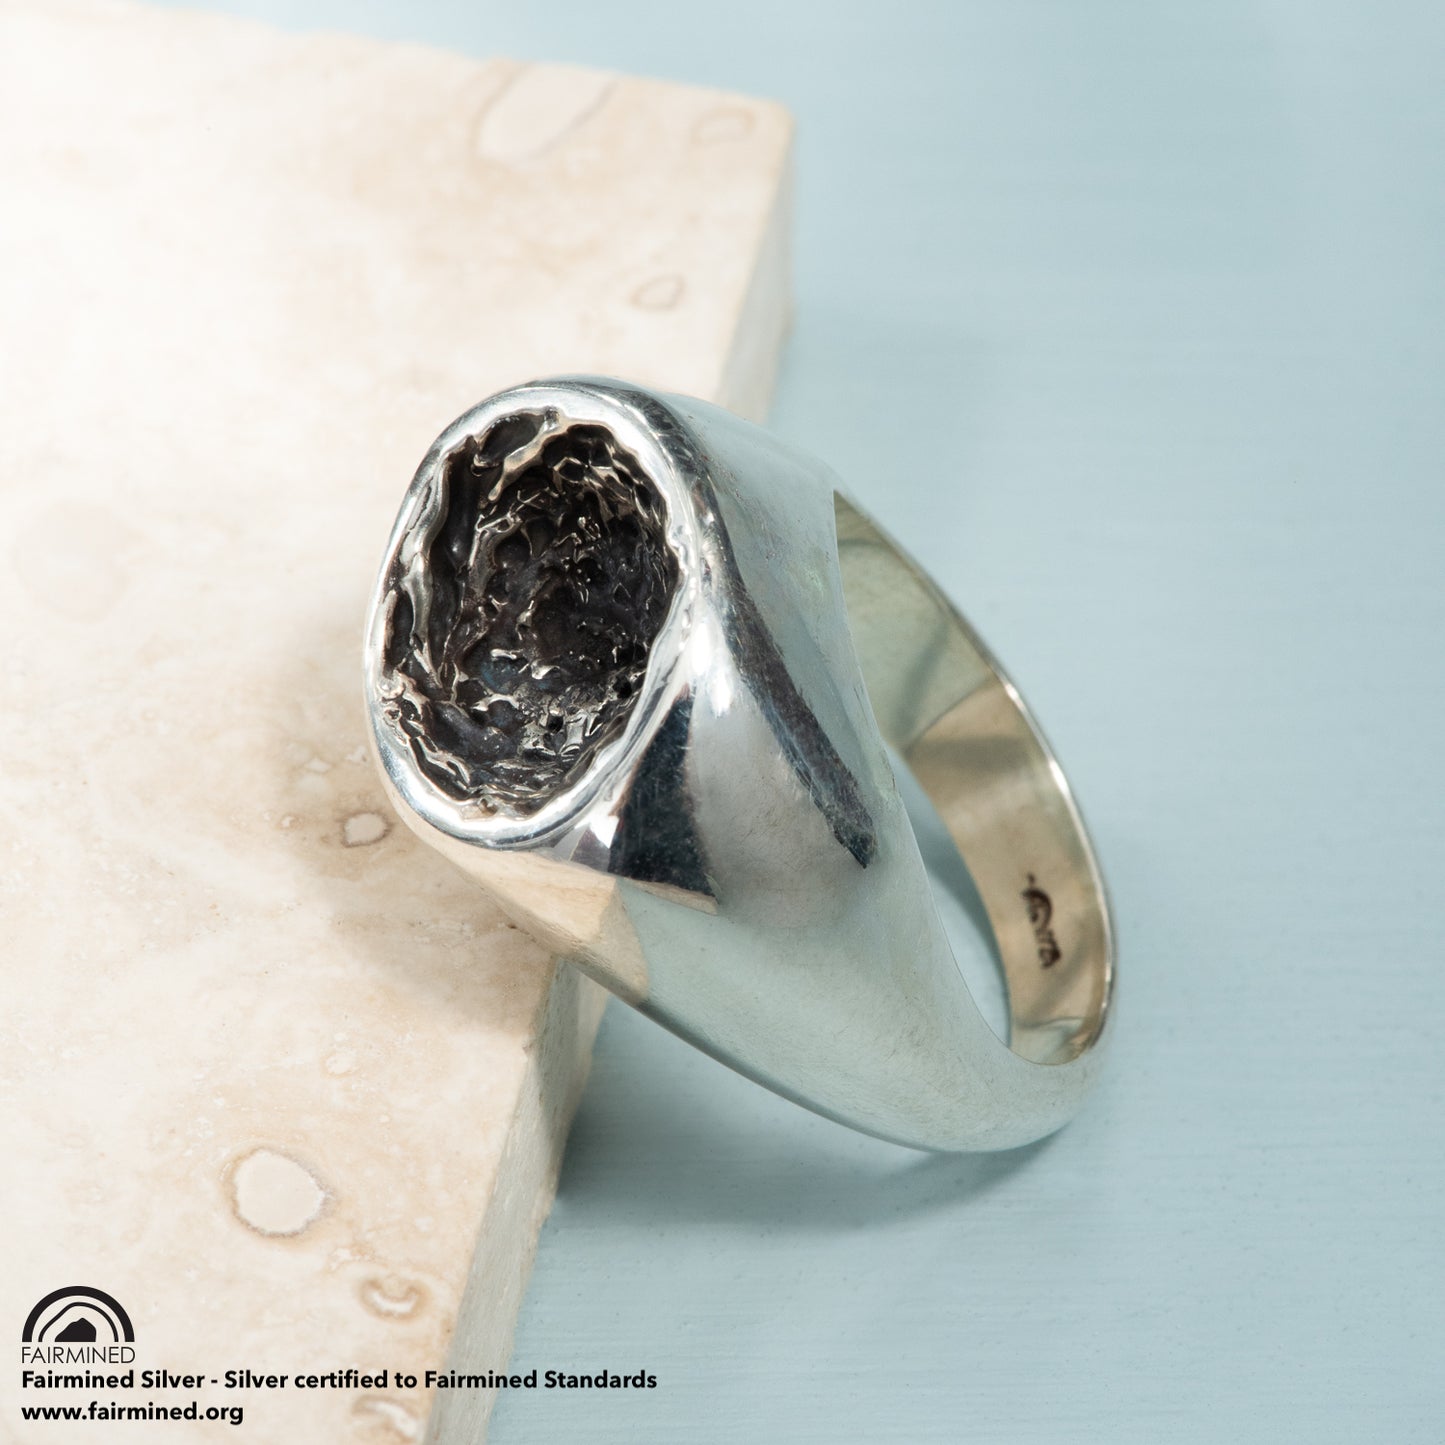 A concave, oxidized and pitted cup in a polished silver band.